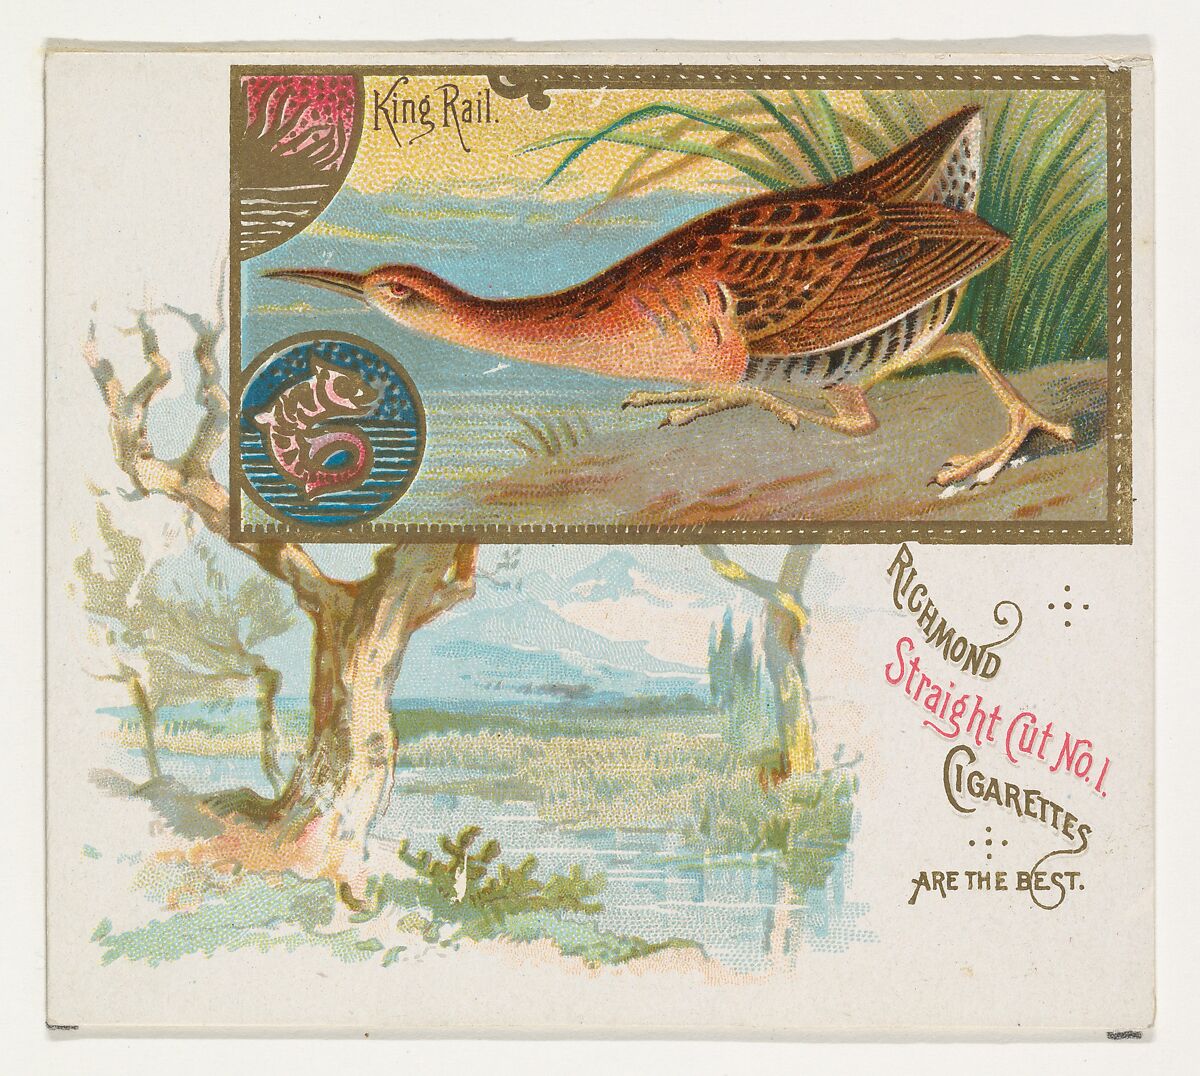 King Rail, from the Game Birds series (N40) for Allen & Ginter Cigarettes, Issued by Allen &amp; Ginter (American, Richmond, Virginia), Commercial color lithograph 